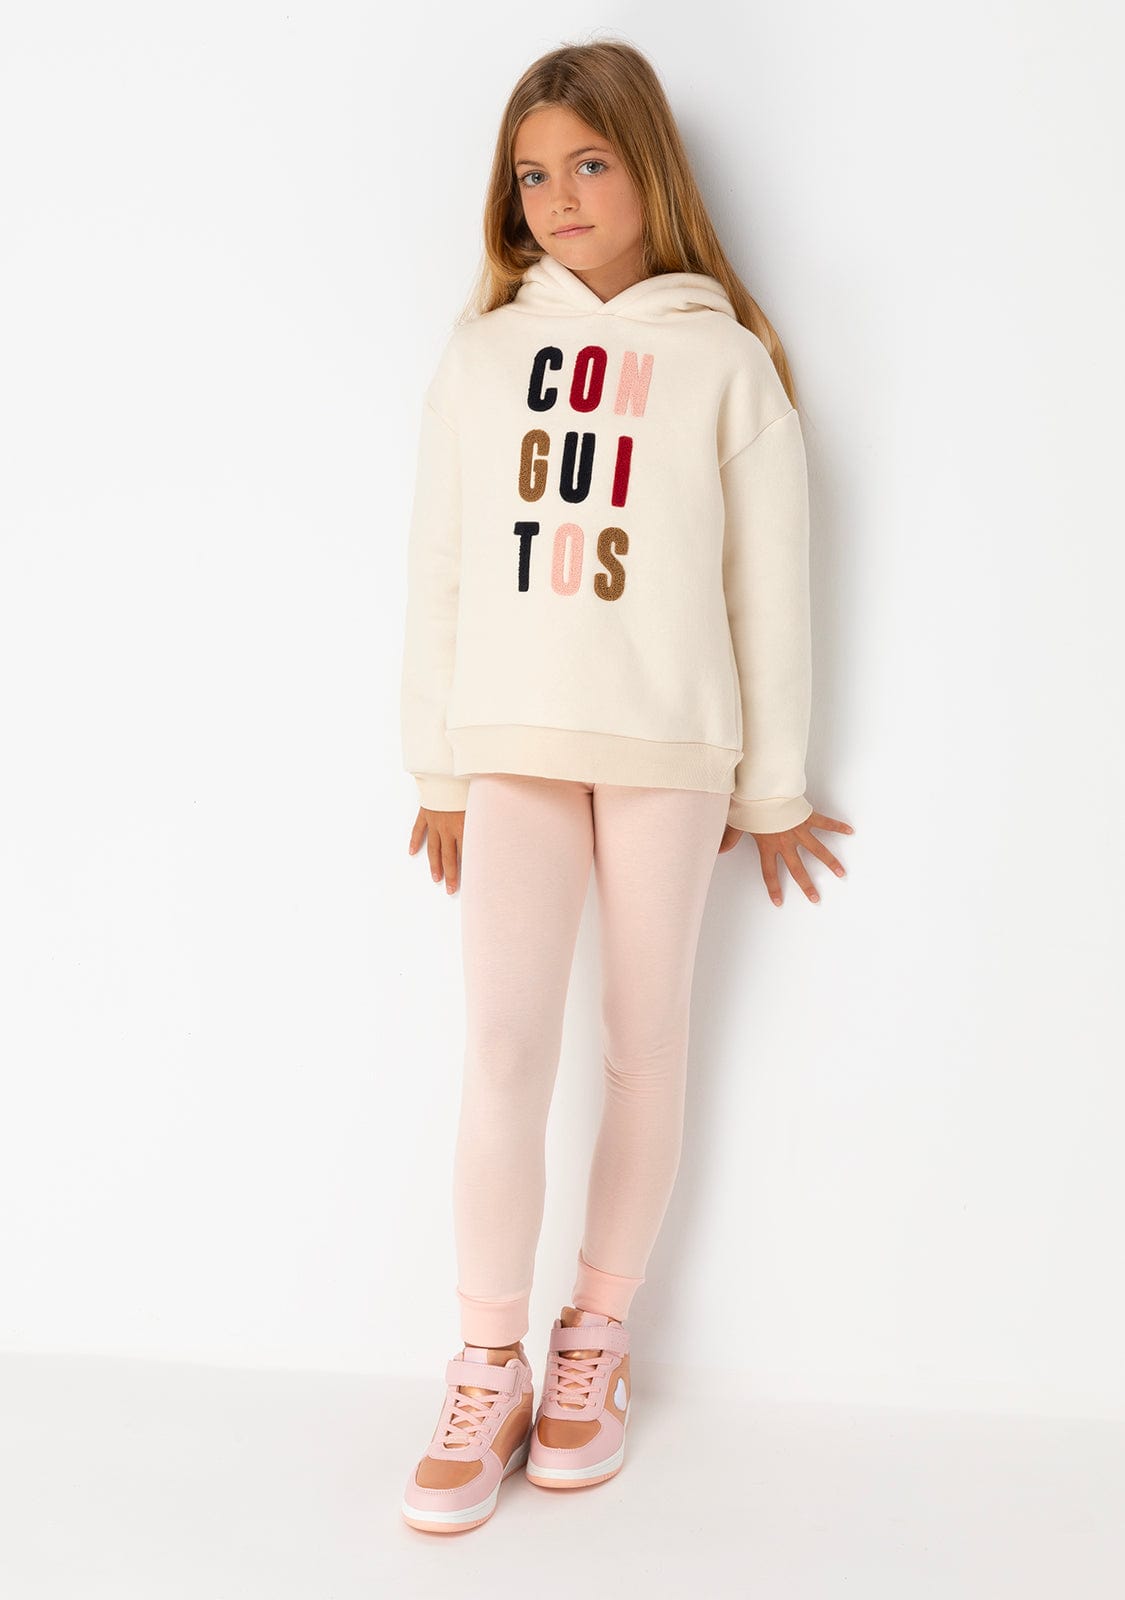 CONGUITOS TEXTIL Clothing Girl's Pink Jersey Joggers